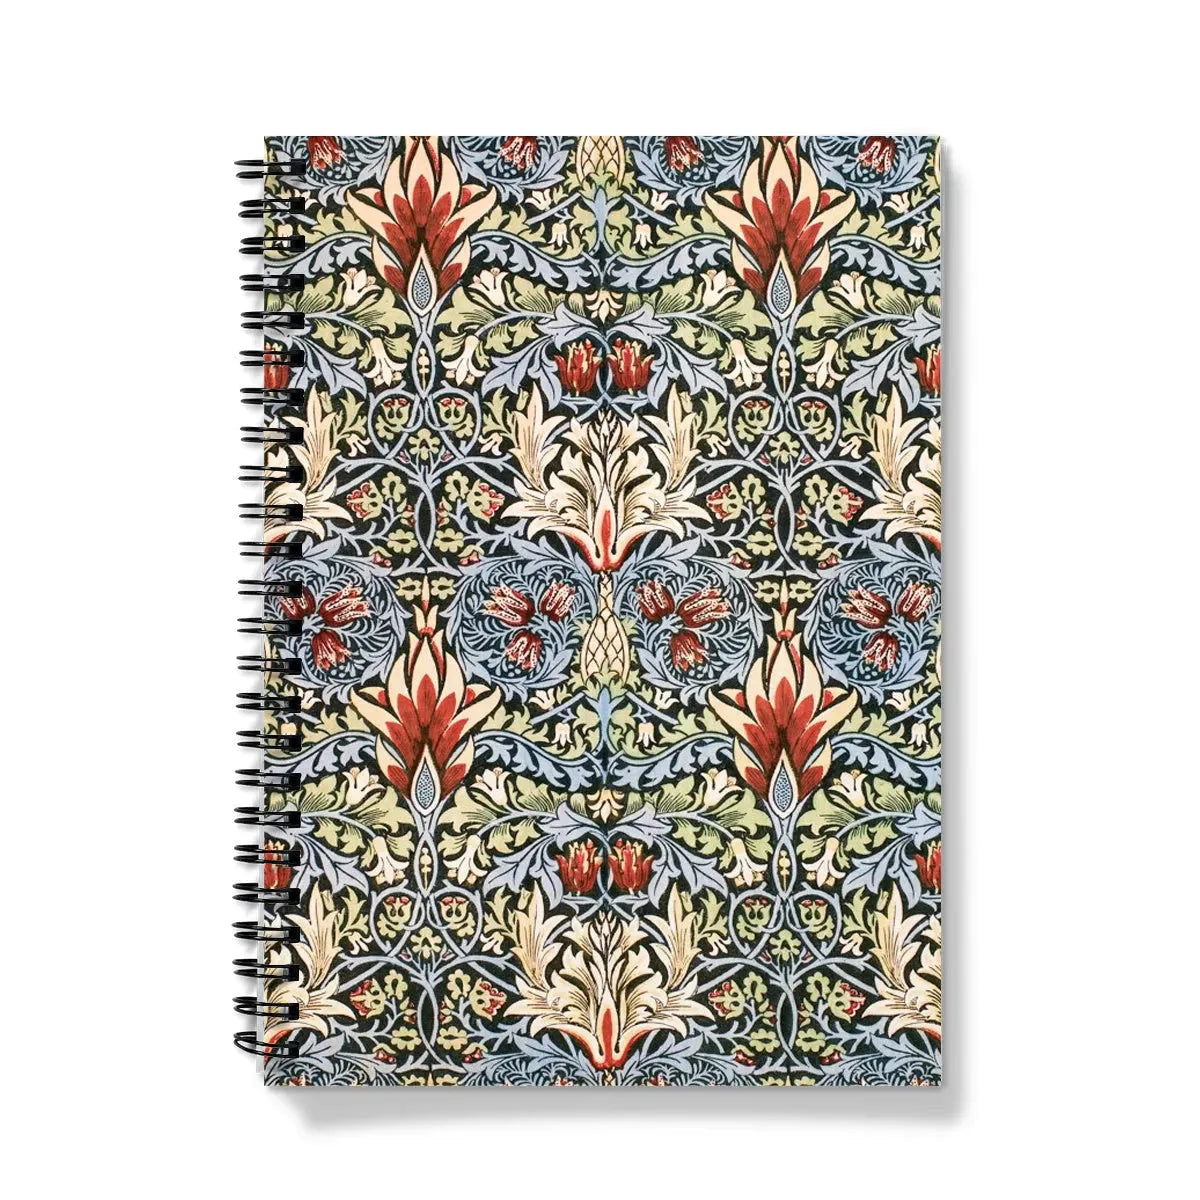 Snakeshead By William Morris Notebook - A5 - Graph Paper - Notebooks & Notepads - Aesthetic Art